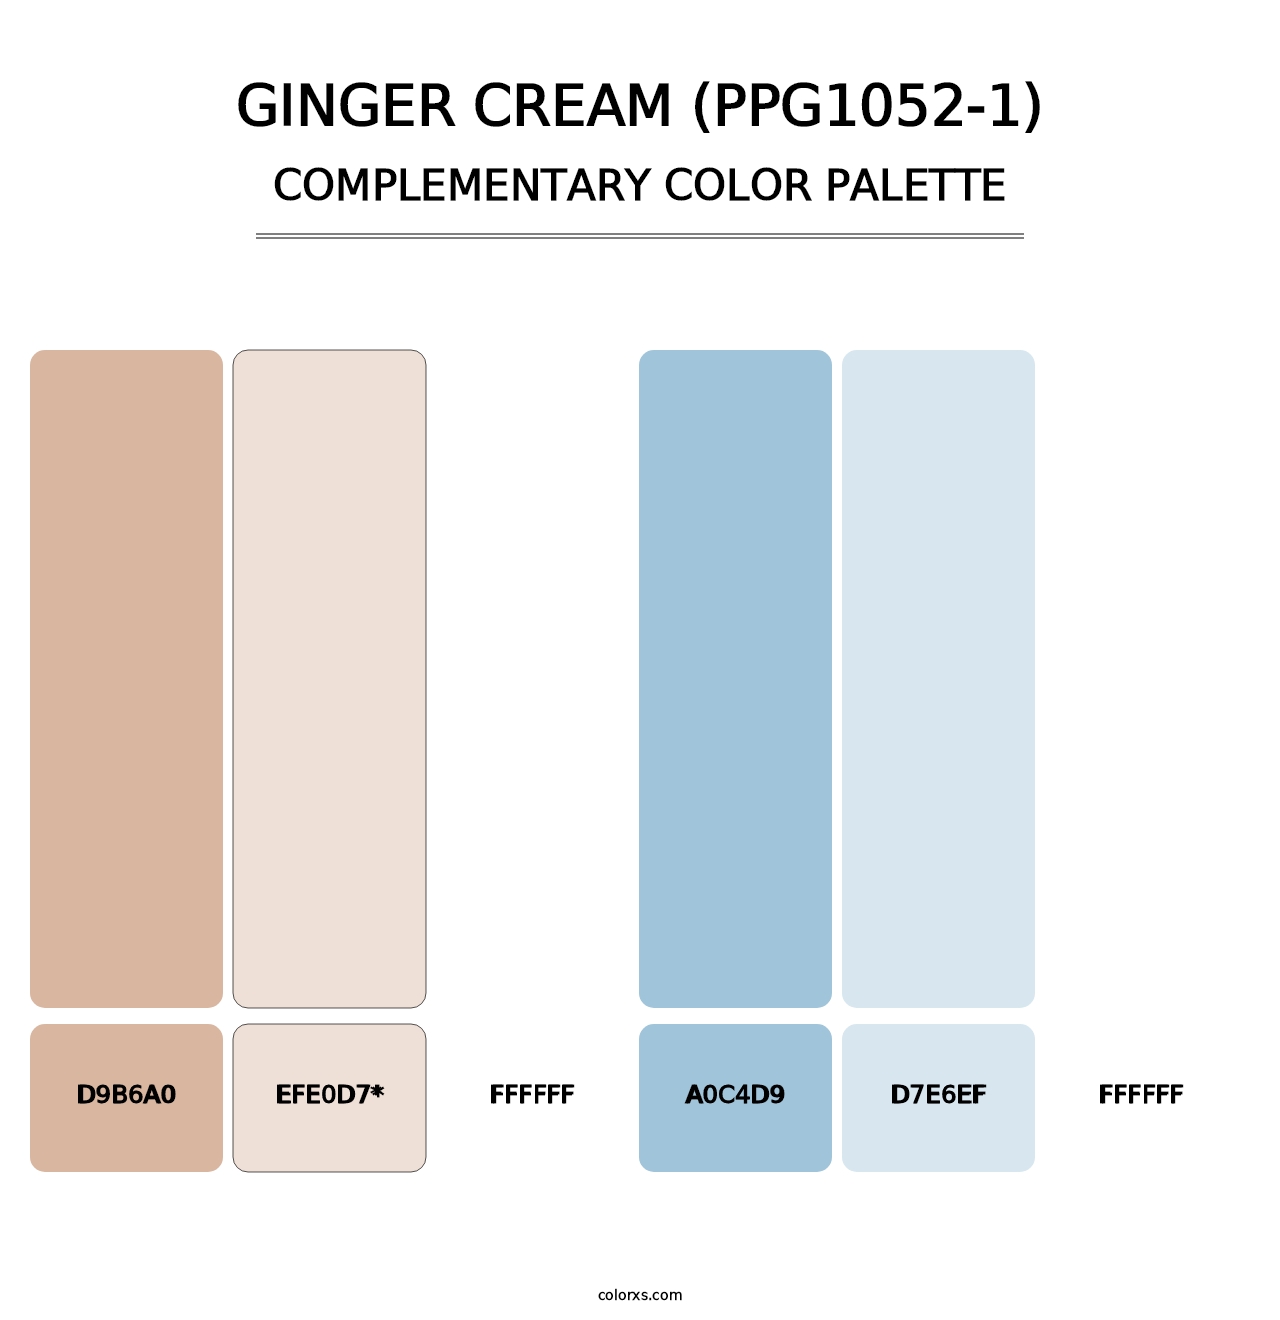 Ginger Cream (PPG1052-1) - Complementary Color Palette